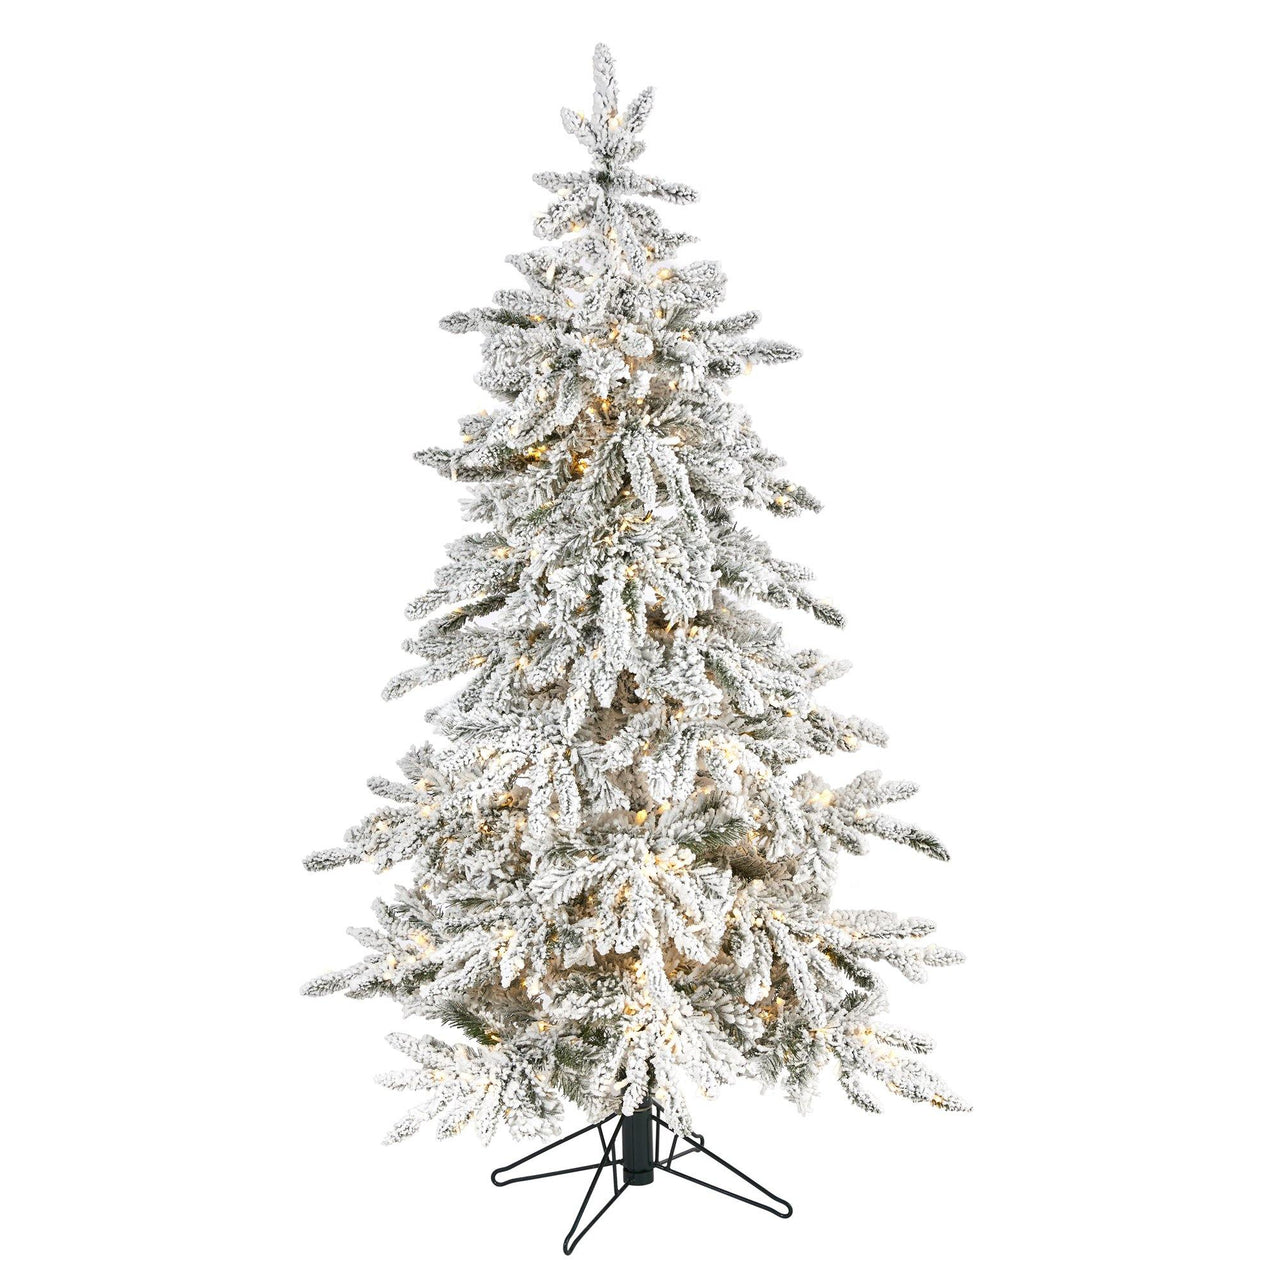 5' Flocked Grand Northern Rocky Fir Artificial Christmas Tree with 650 Warm Micro (Multifunction with Remote Control) LED Lights, Instant Connect Technology and 386 Bendable Branches